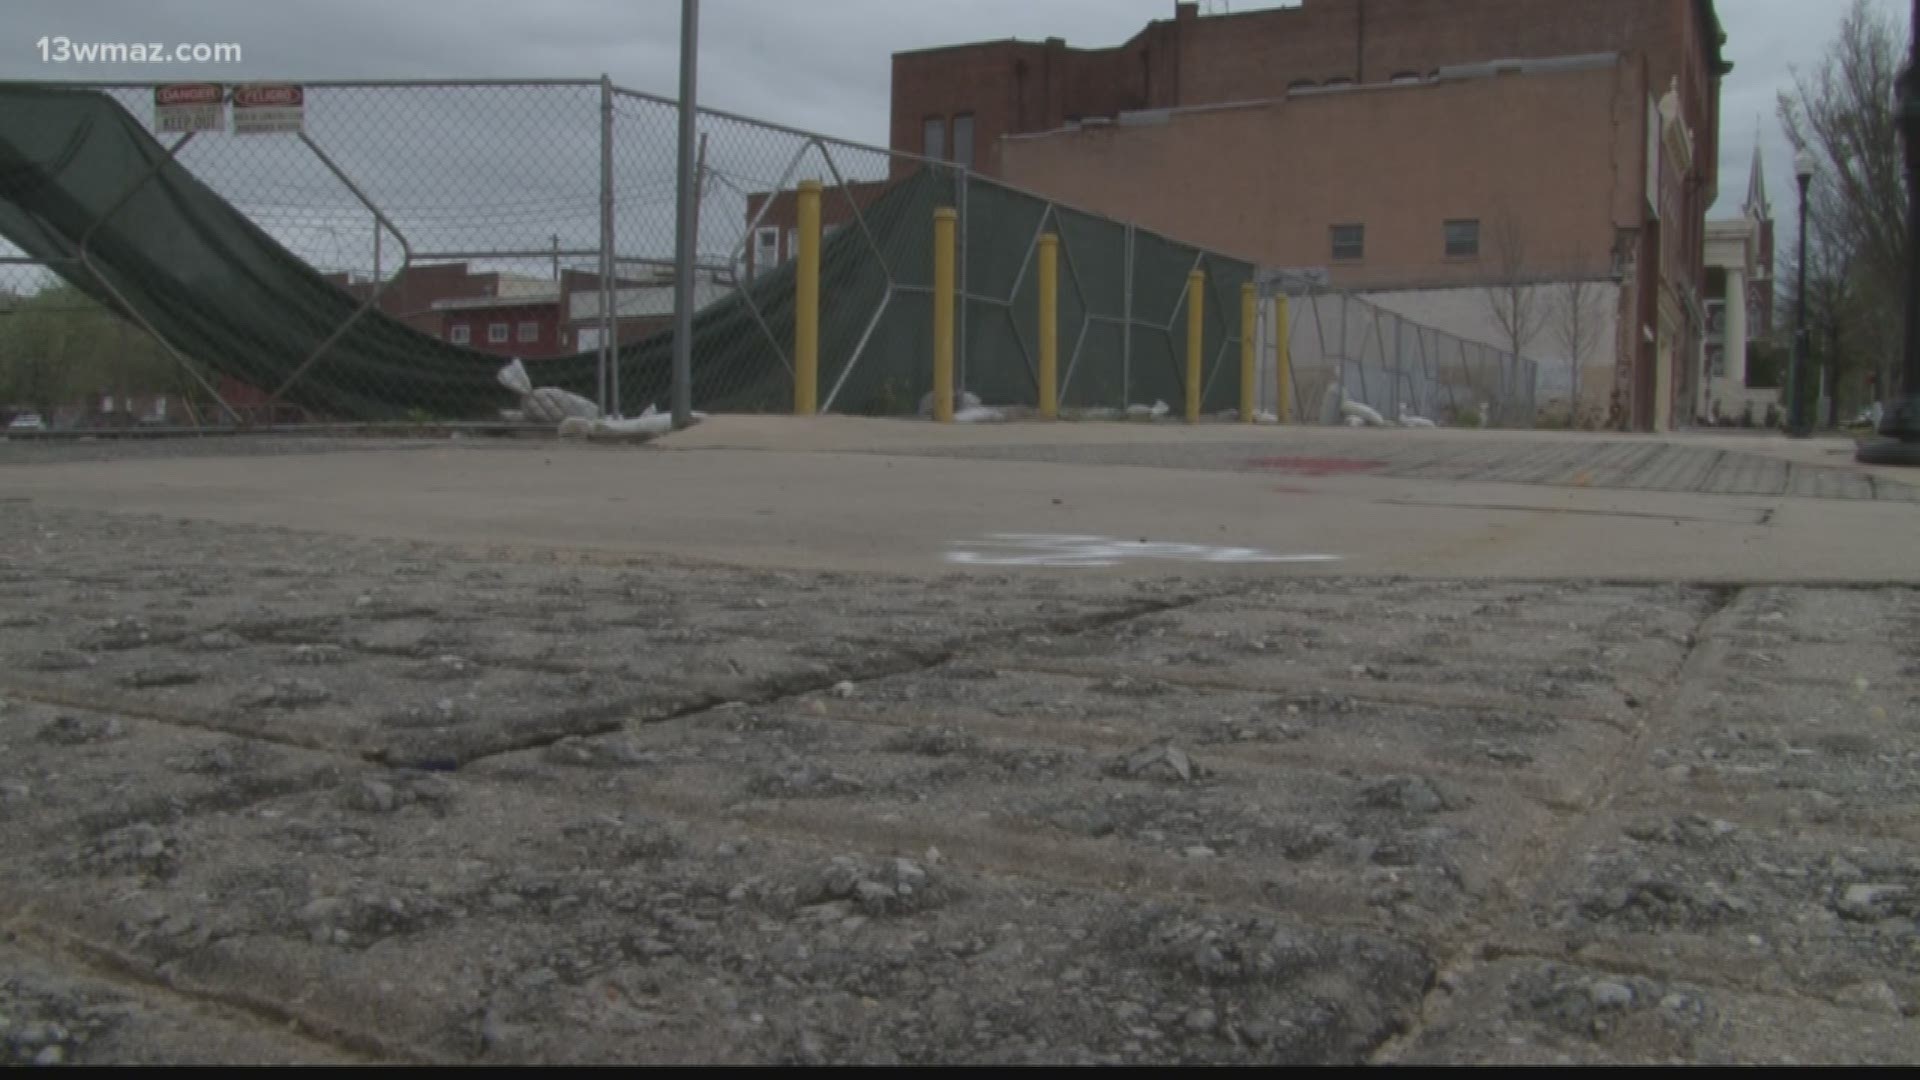 Tuesday, Bibb County commissioners will decide to whether to approve a loan to build two new parking decks downtown. It's all part of a multi-million dollar drive to completely change the stretch of First and Poplar streets.